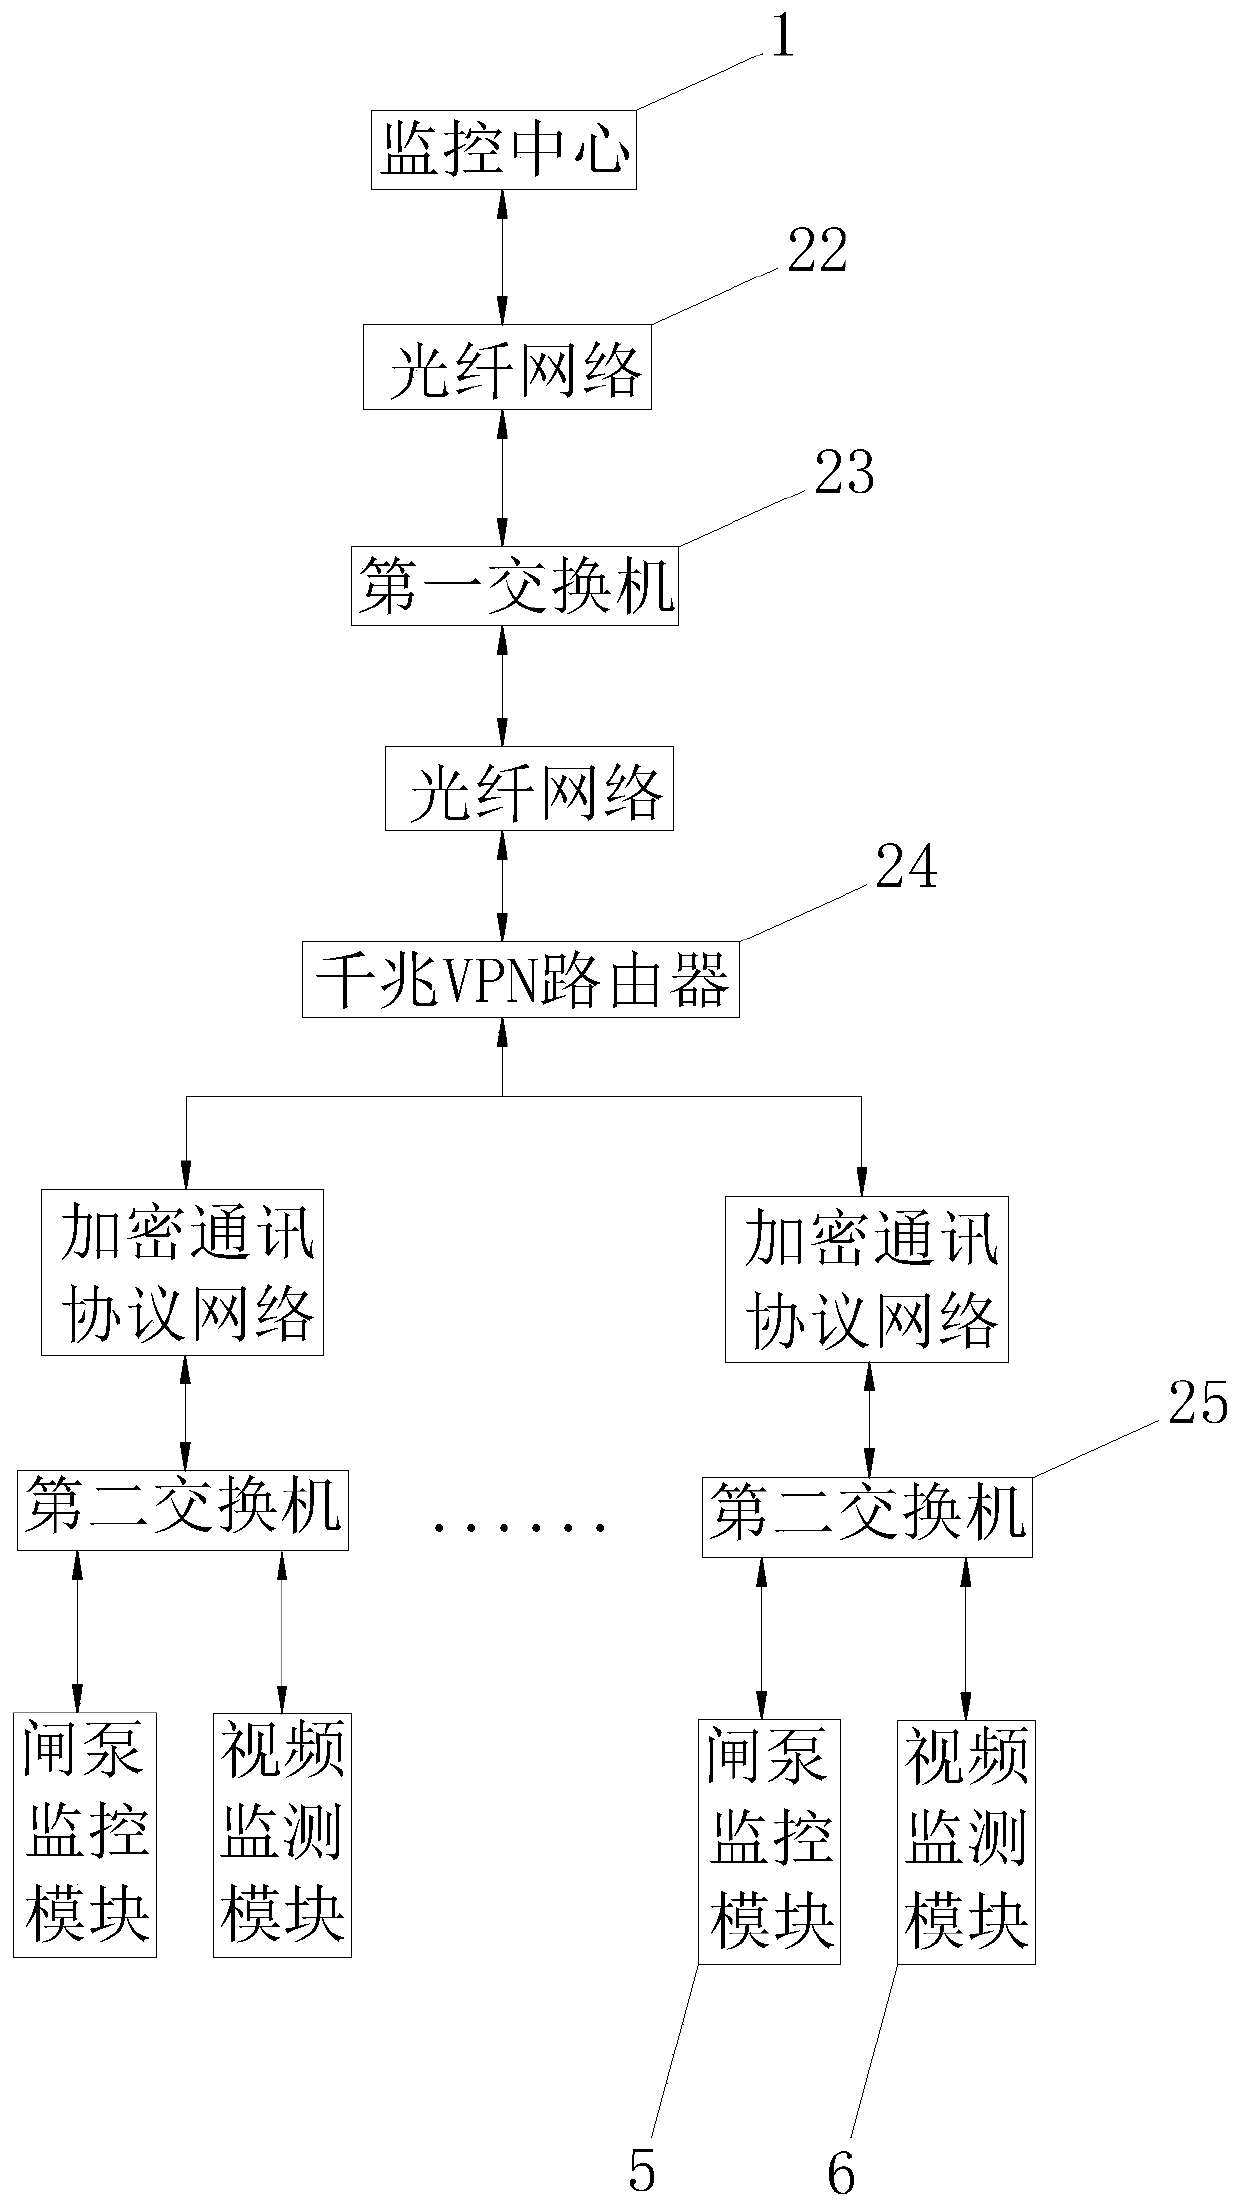 Intelligent monitoring and management system and method for river water pollution monitoring and early warning